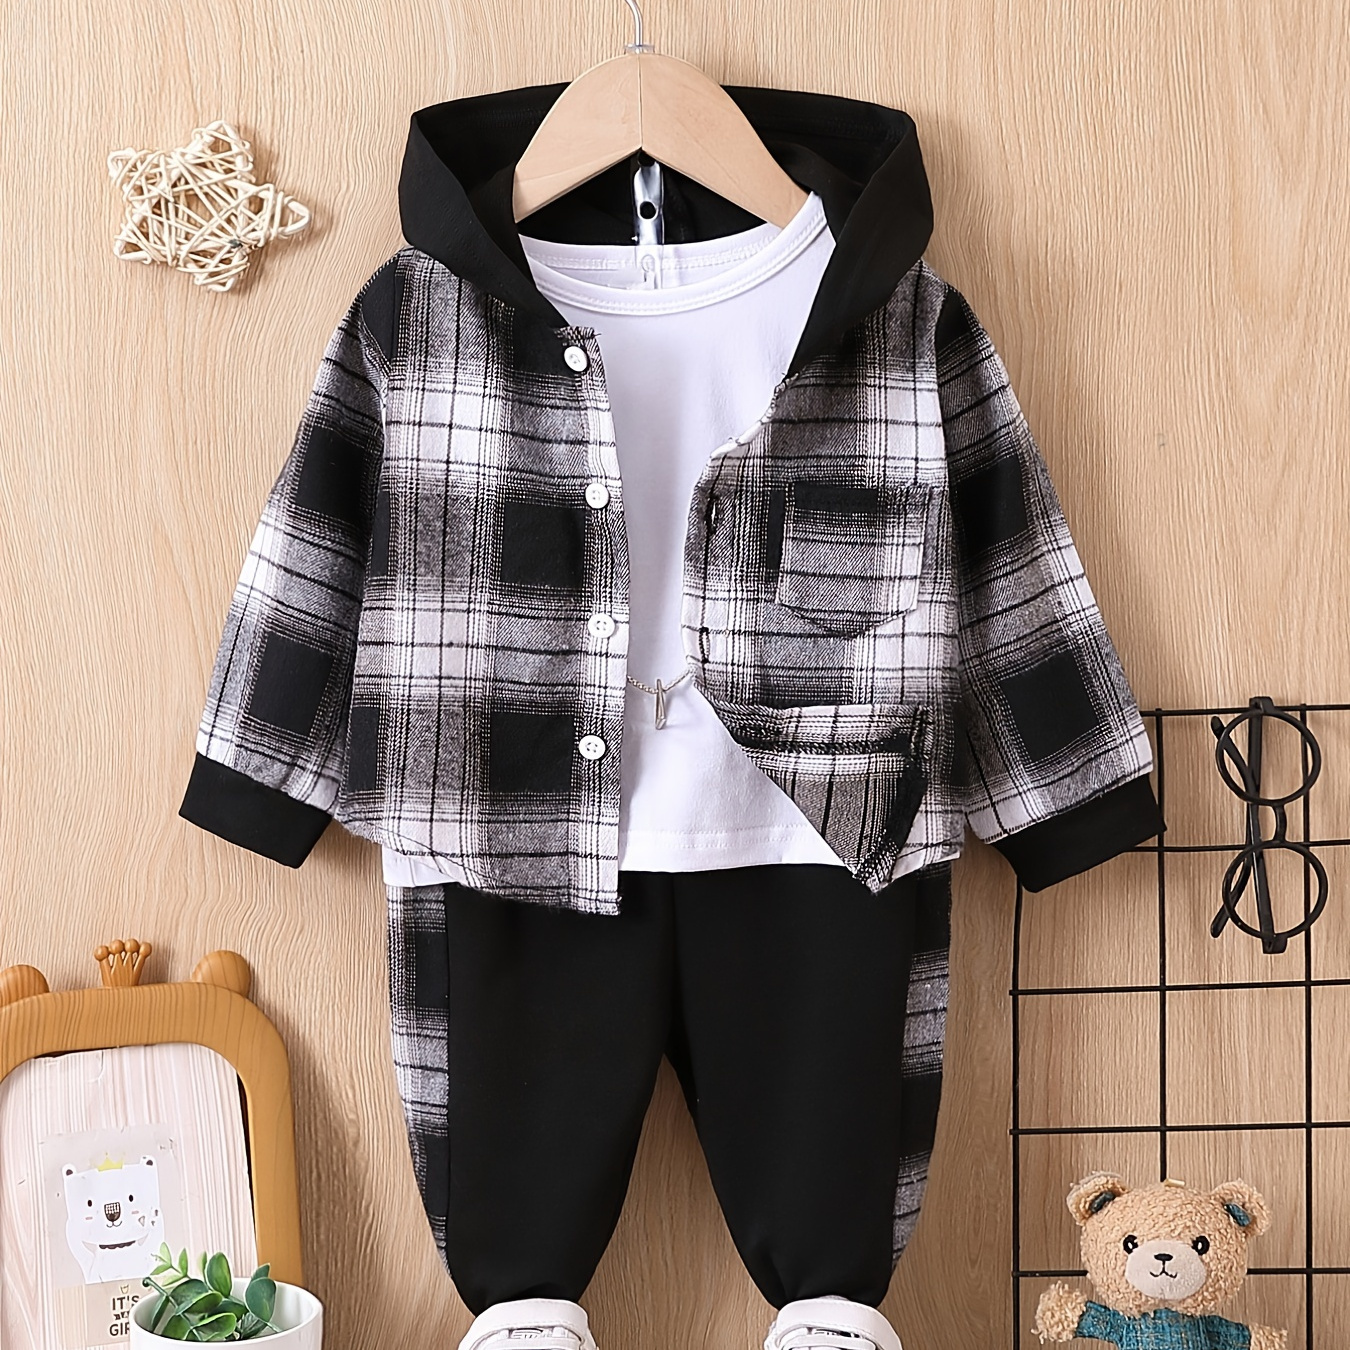 

Baby Boys Stylish Outfit - Hooded Black And White Plaid Shirt & Contrast Color Stitching Trousers Set Your Handsome Kids!